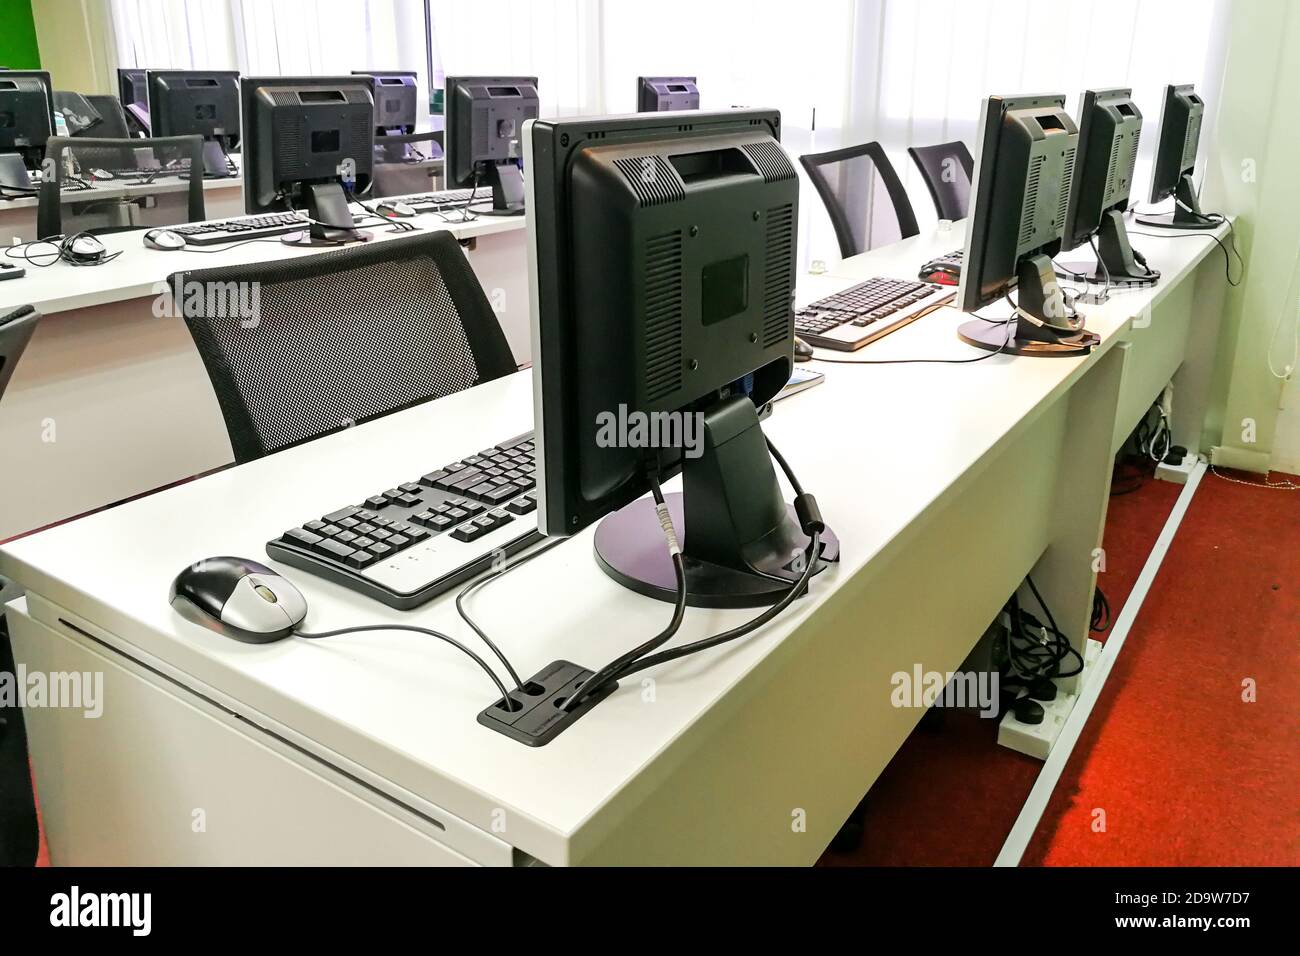 Empty computer classroom with monitors on top of table Stock Photo